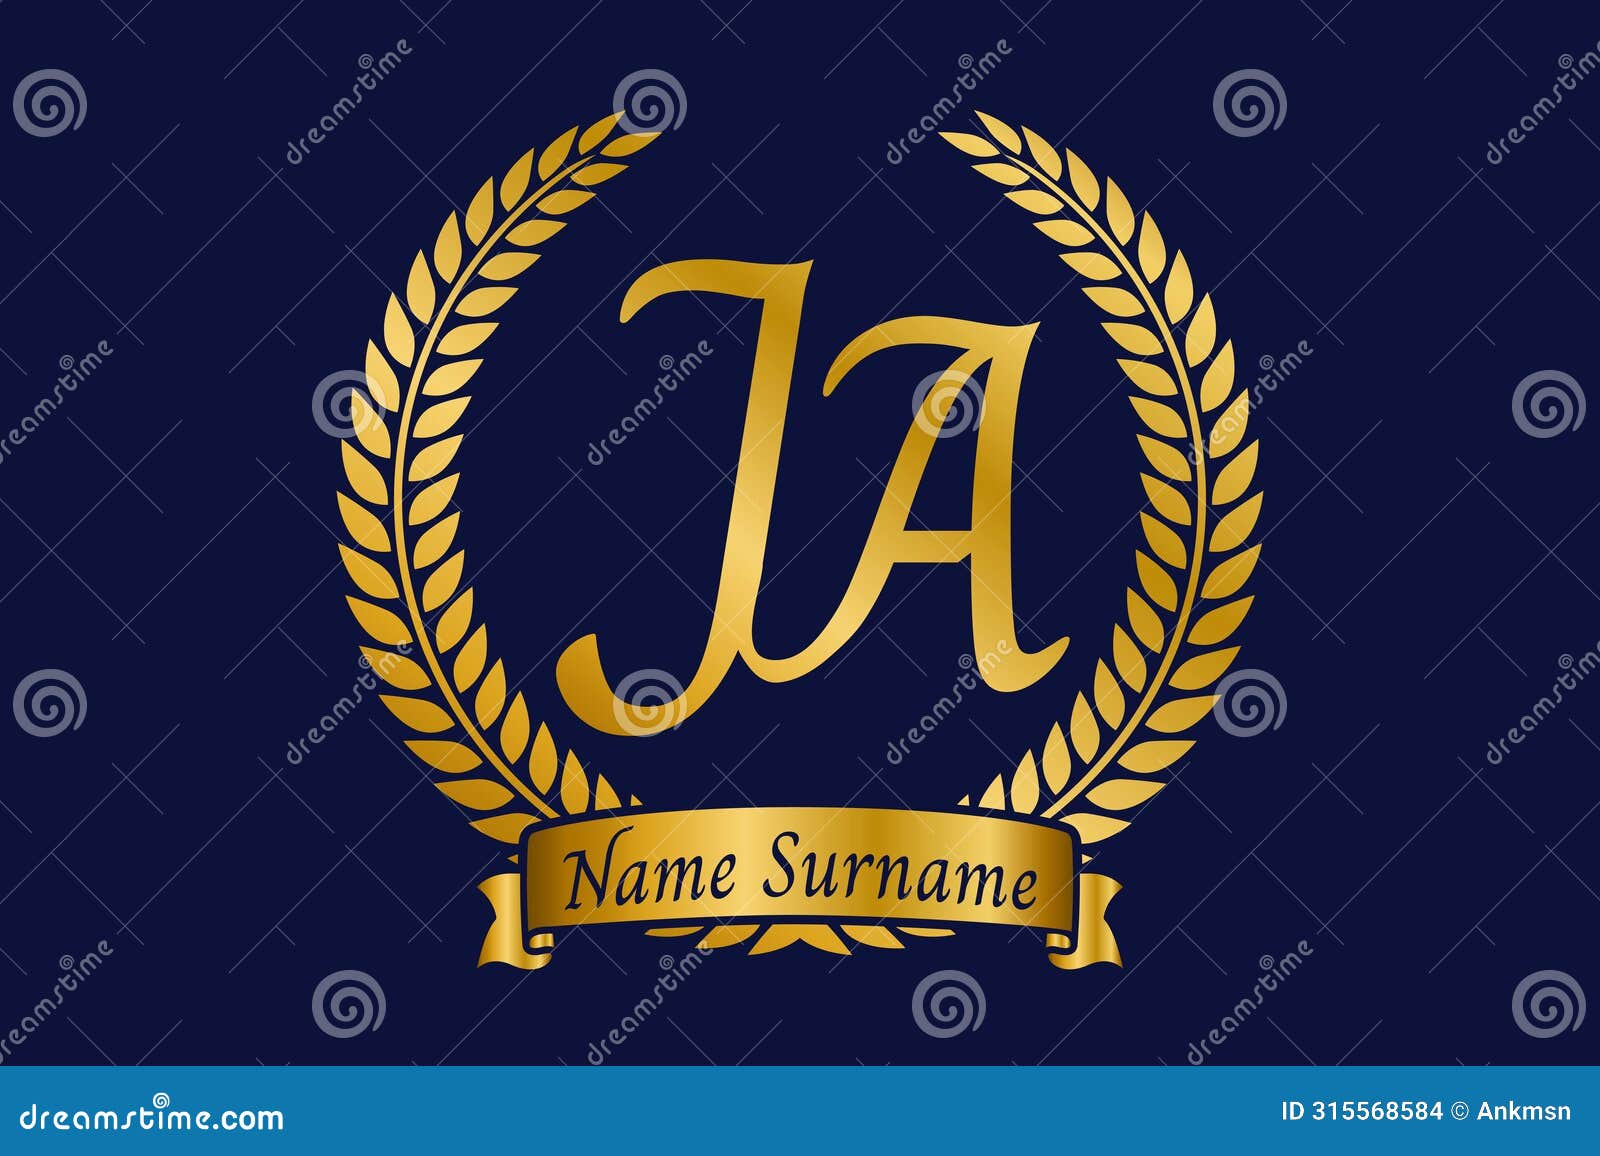 initial letter j and a, ja monogram logo  with laurel wreath. luxury golden calligraphy font